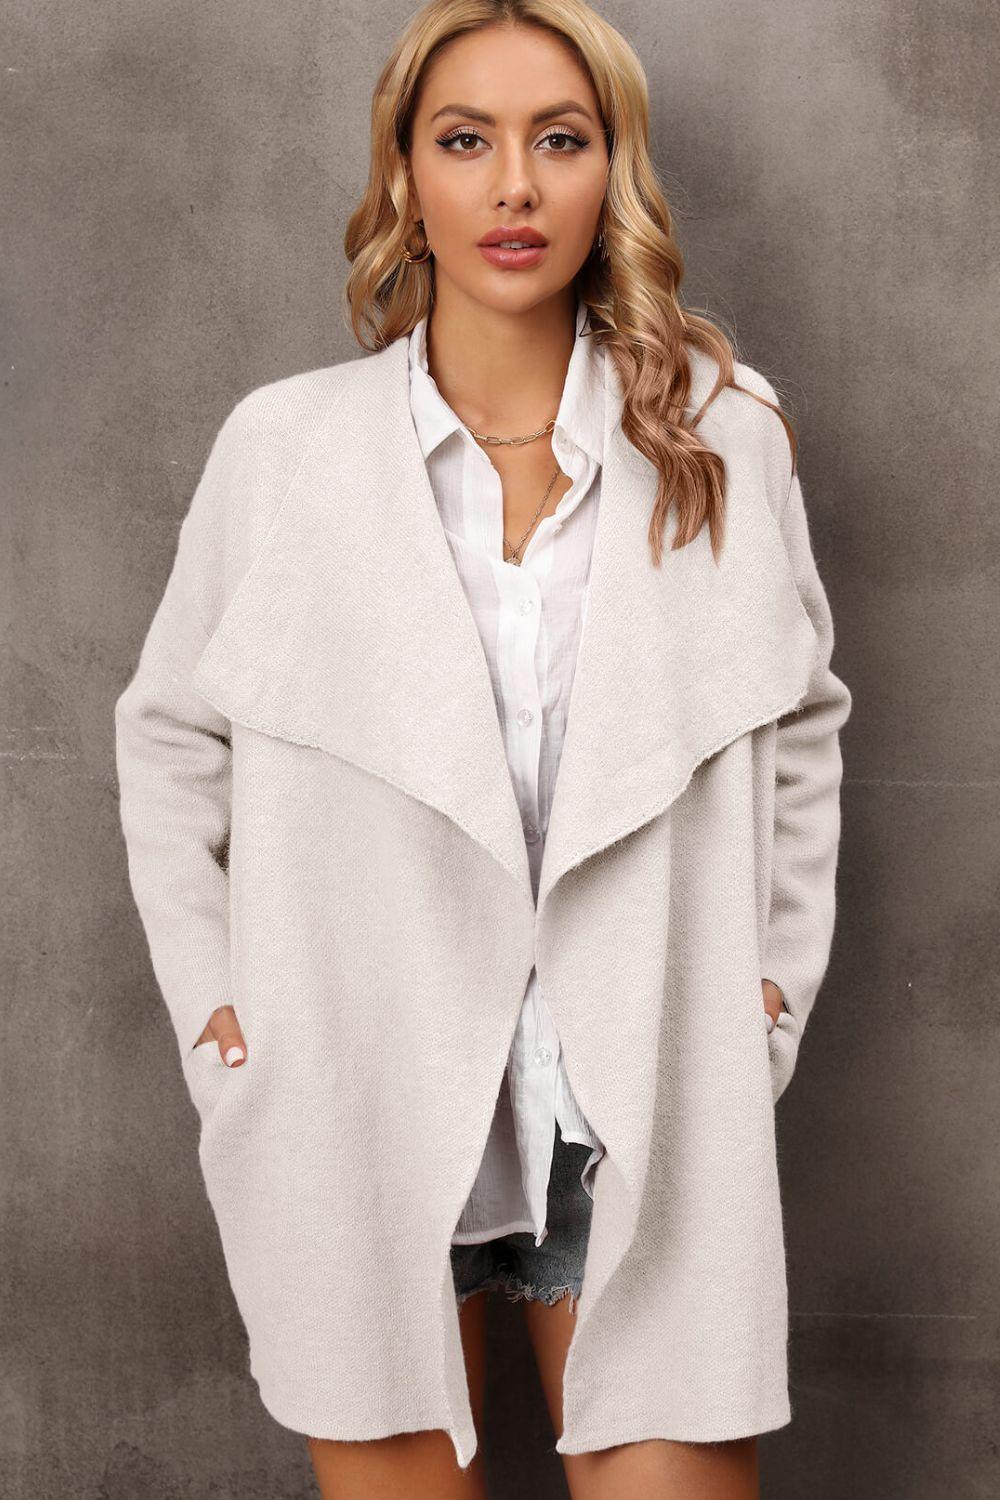 Waterfall Collar Longline Cardigan with Side Pockets - Lucianne Boutique